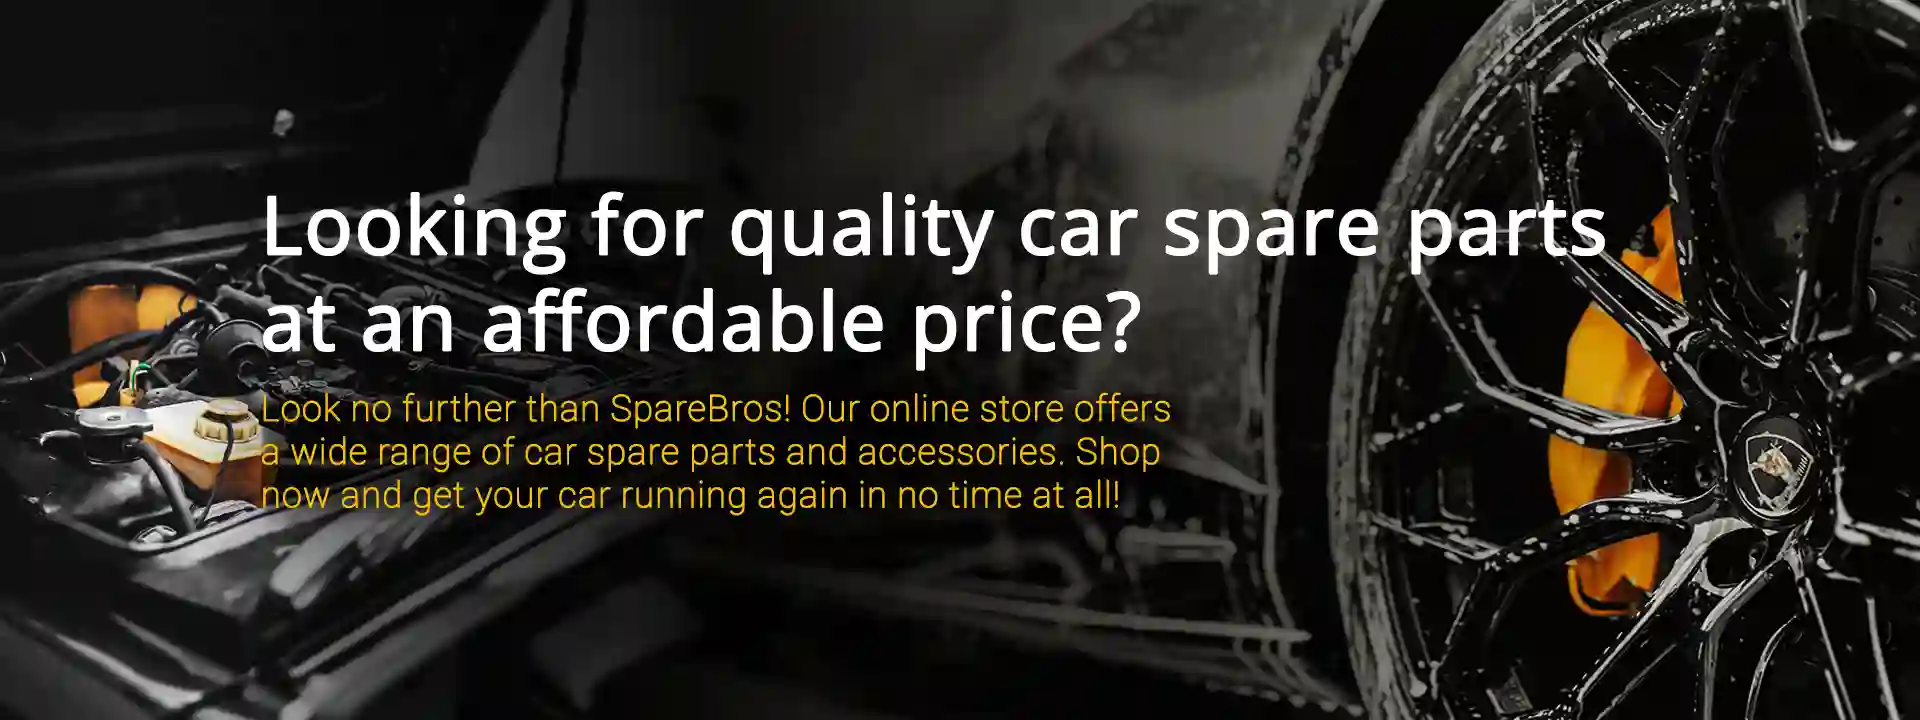 Wide Selection of Auto Parts - Find Everything You Need in One Place!